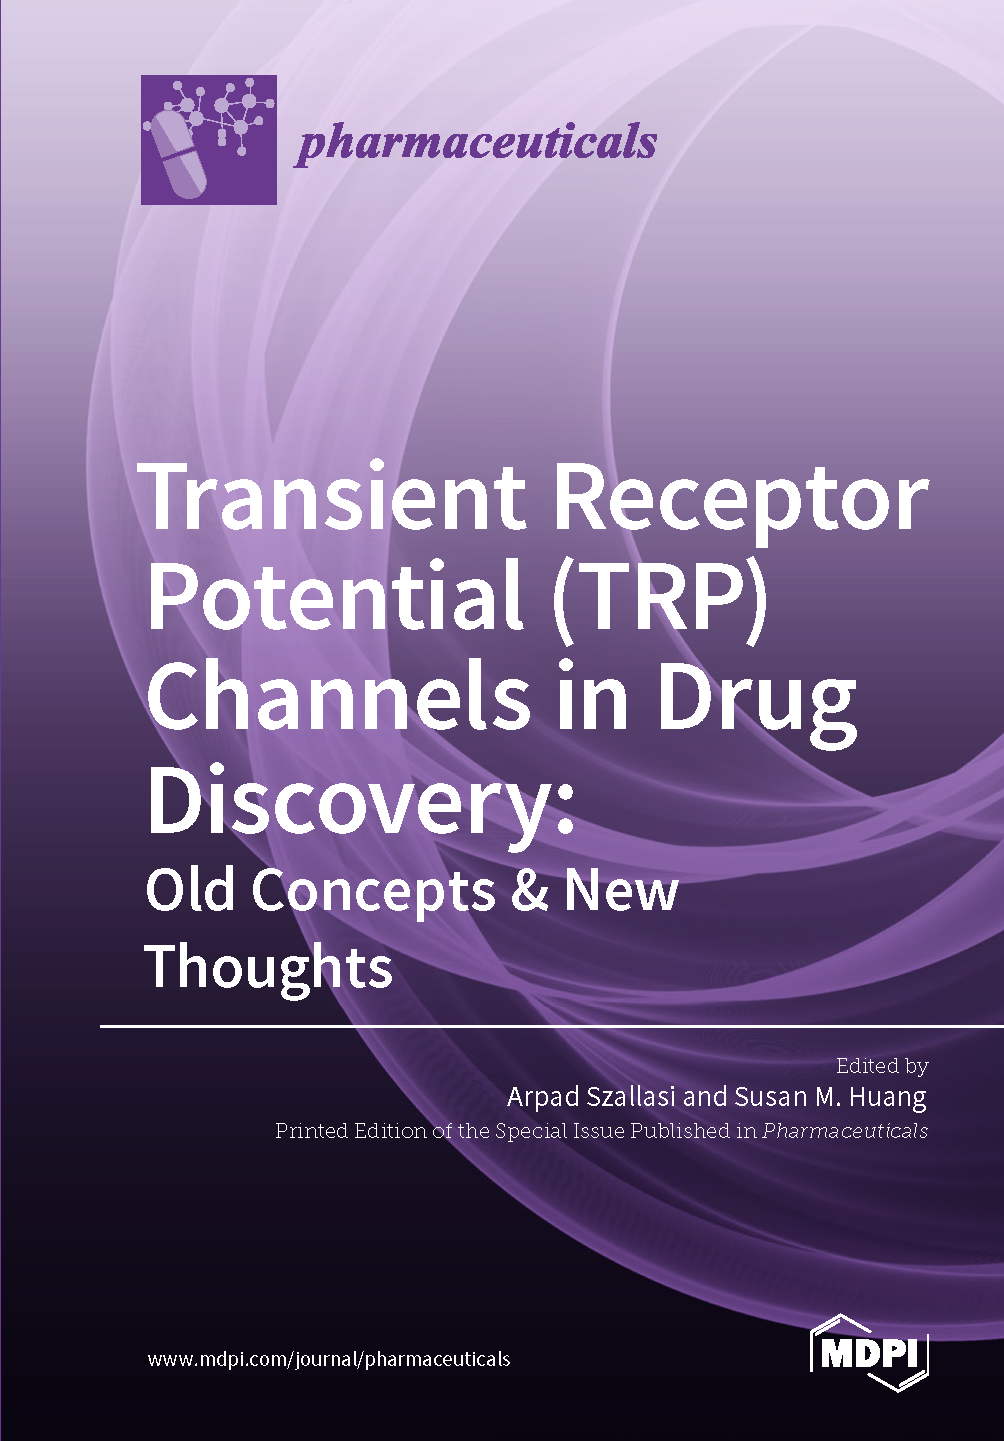 Transient Receptor Potential (TRP) Channels in Drug Discovery: Old Concepts & New Thoughts